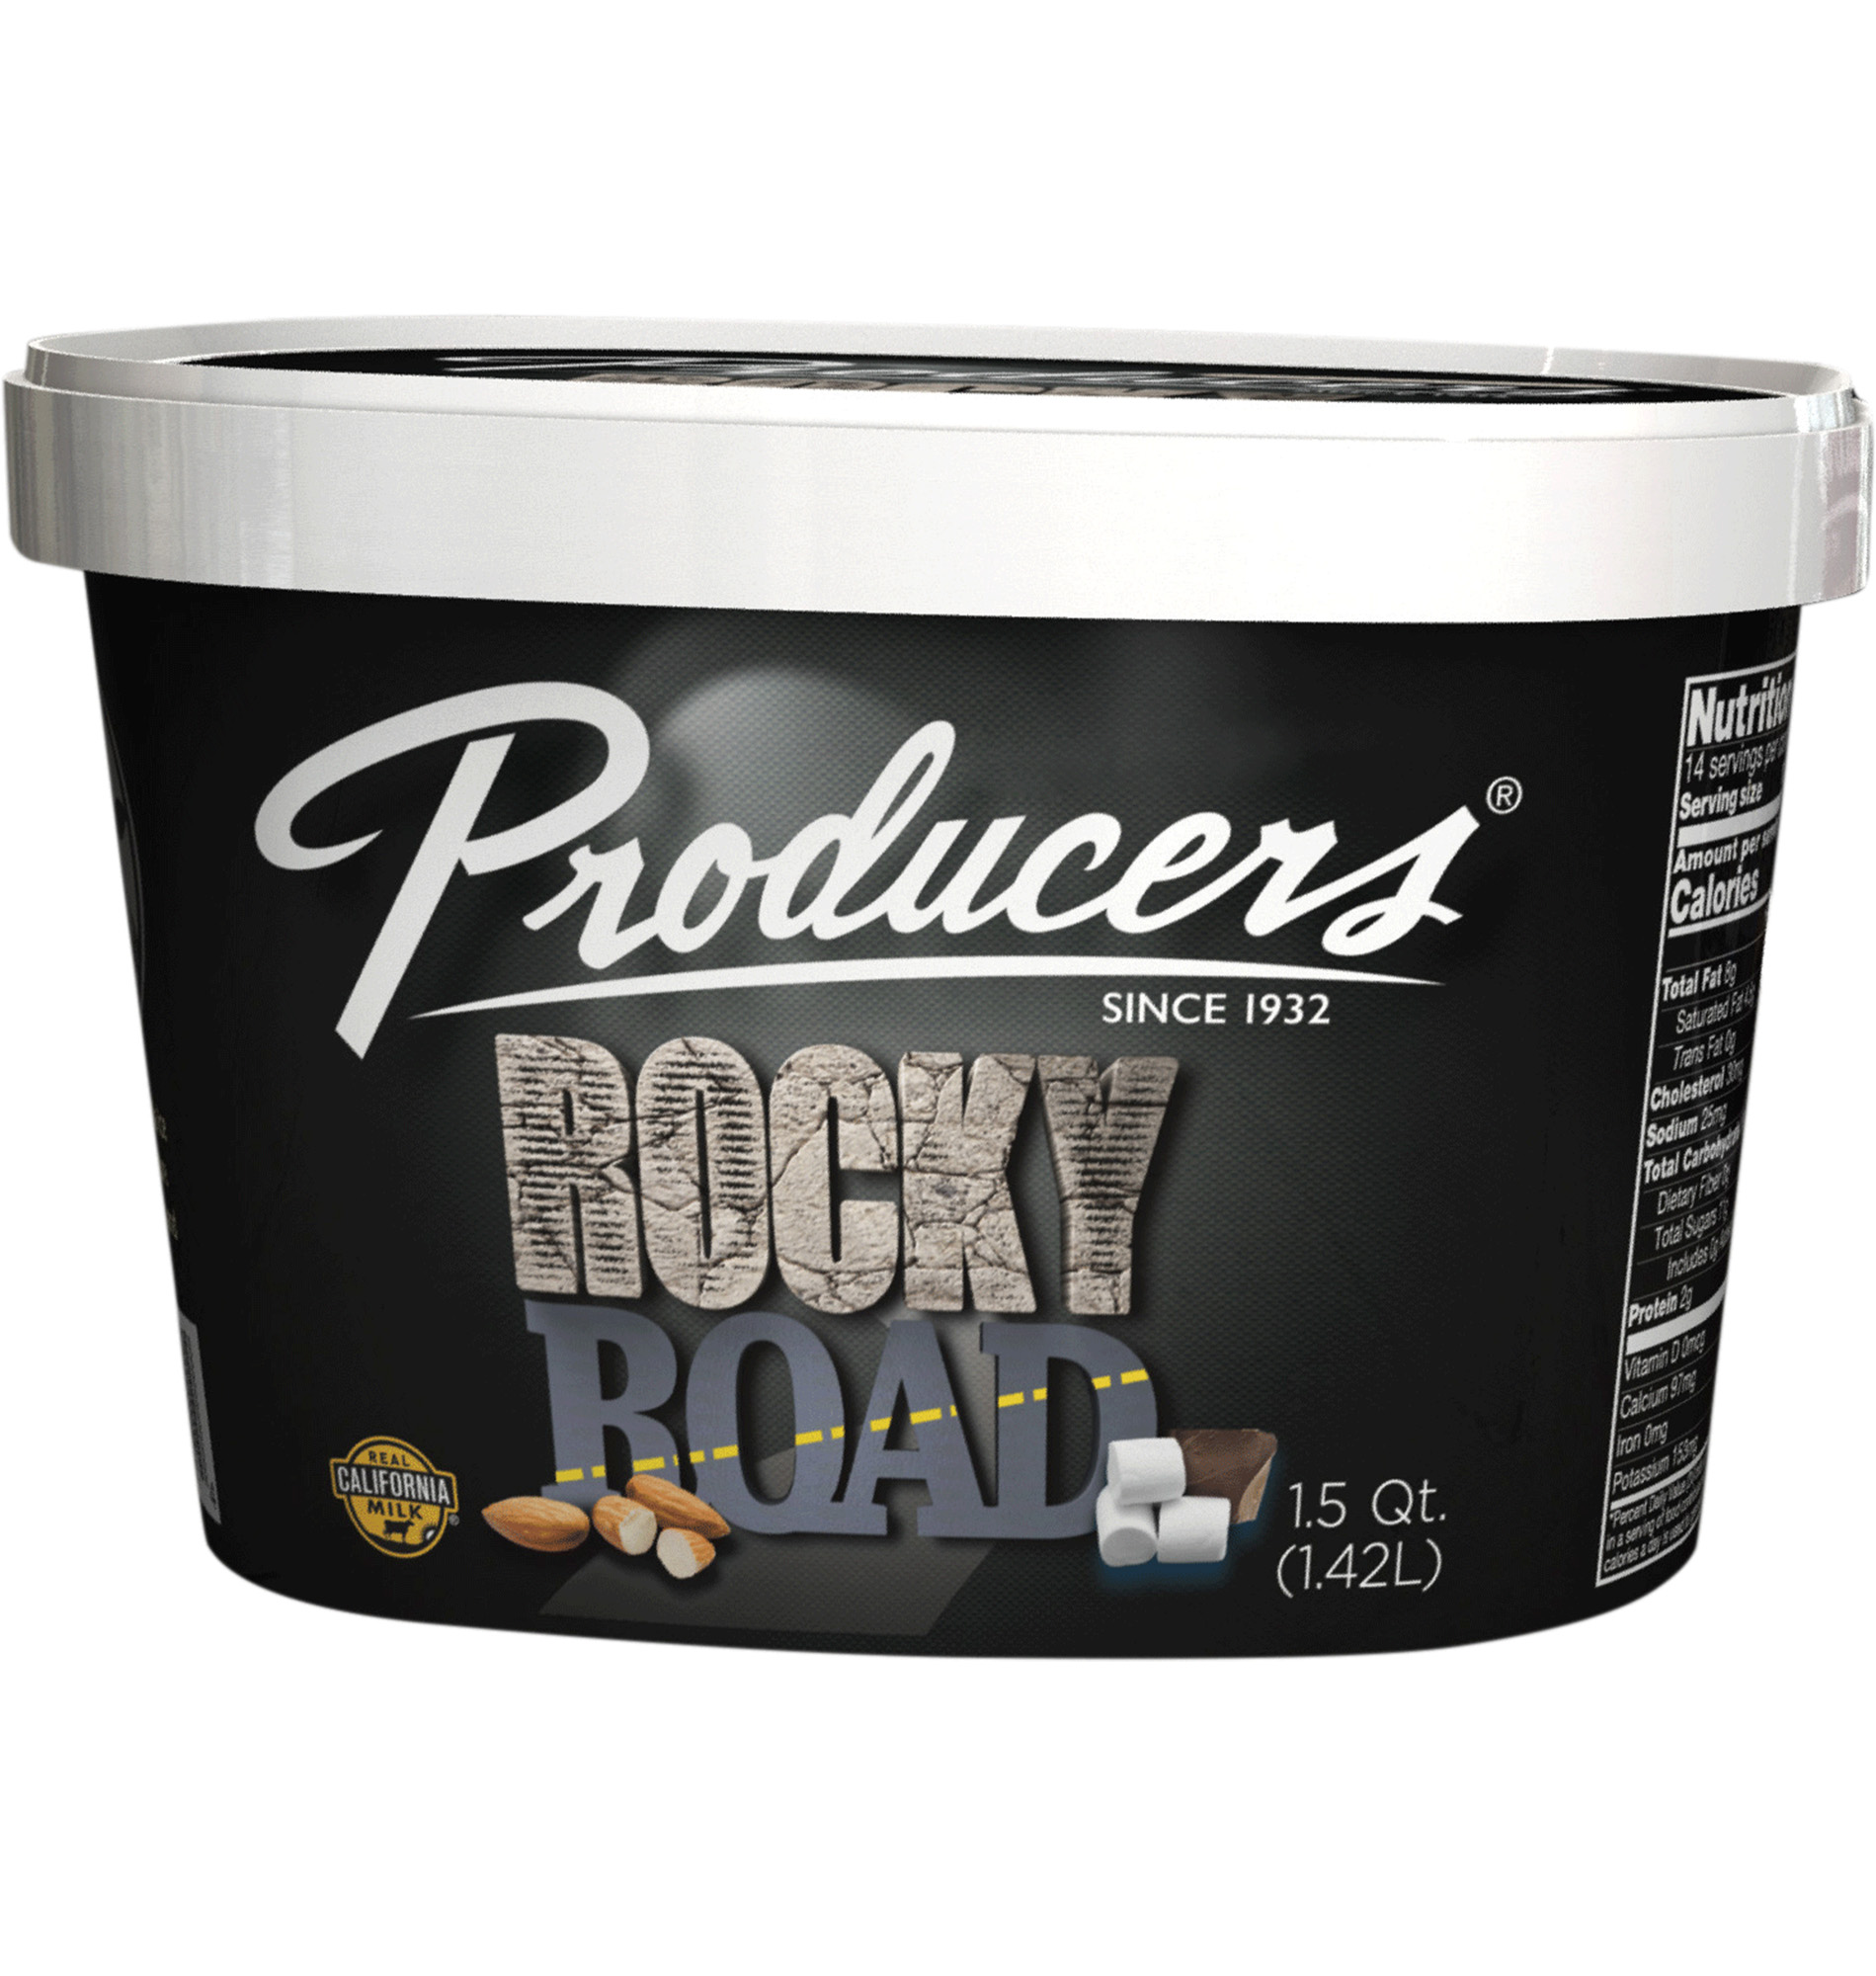 Rocky Road Producers Dairy Ice Cream Container